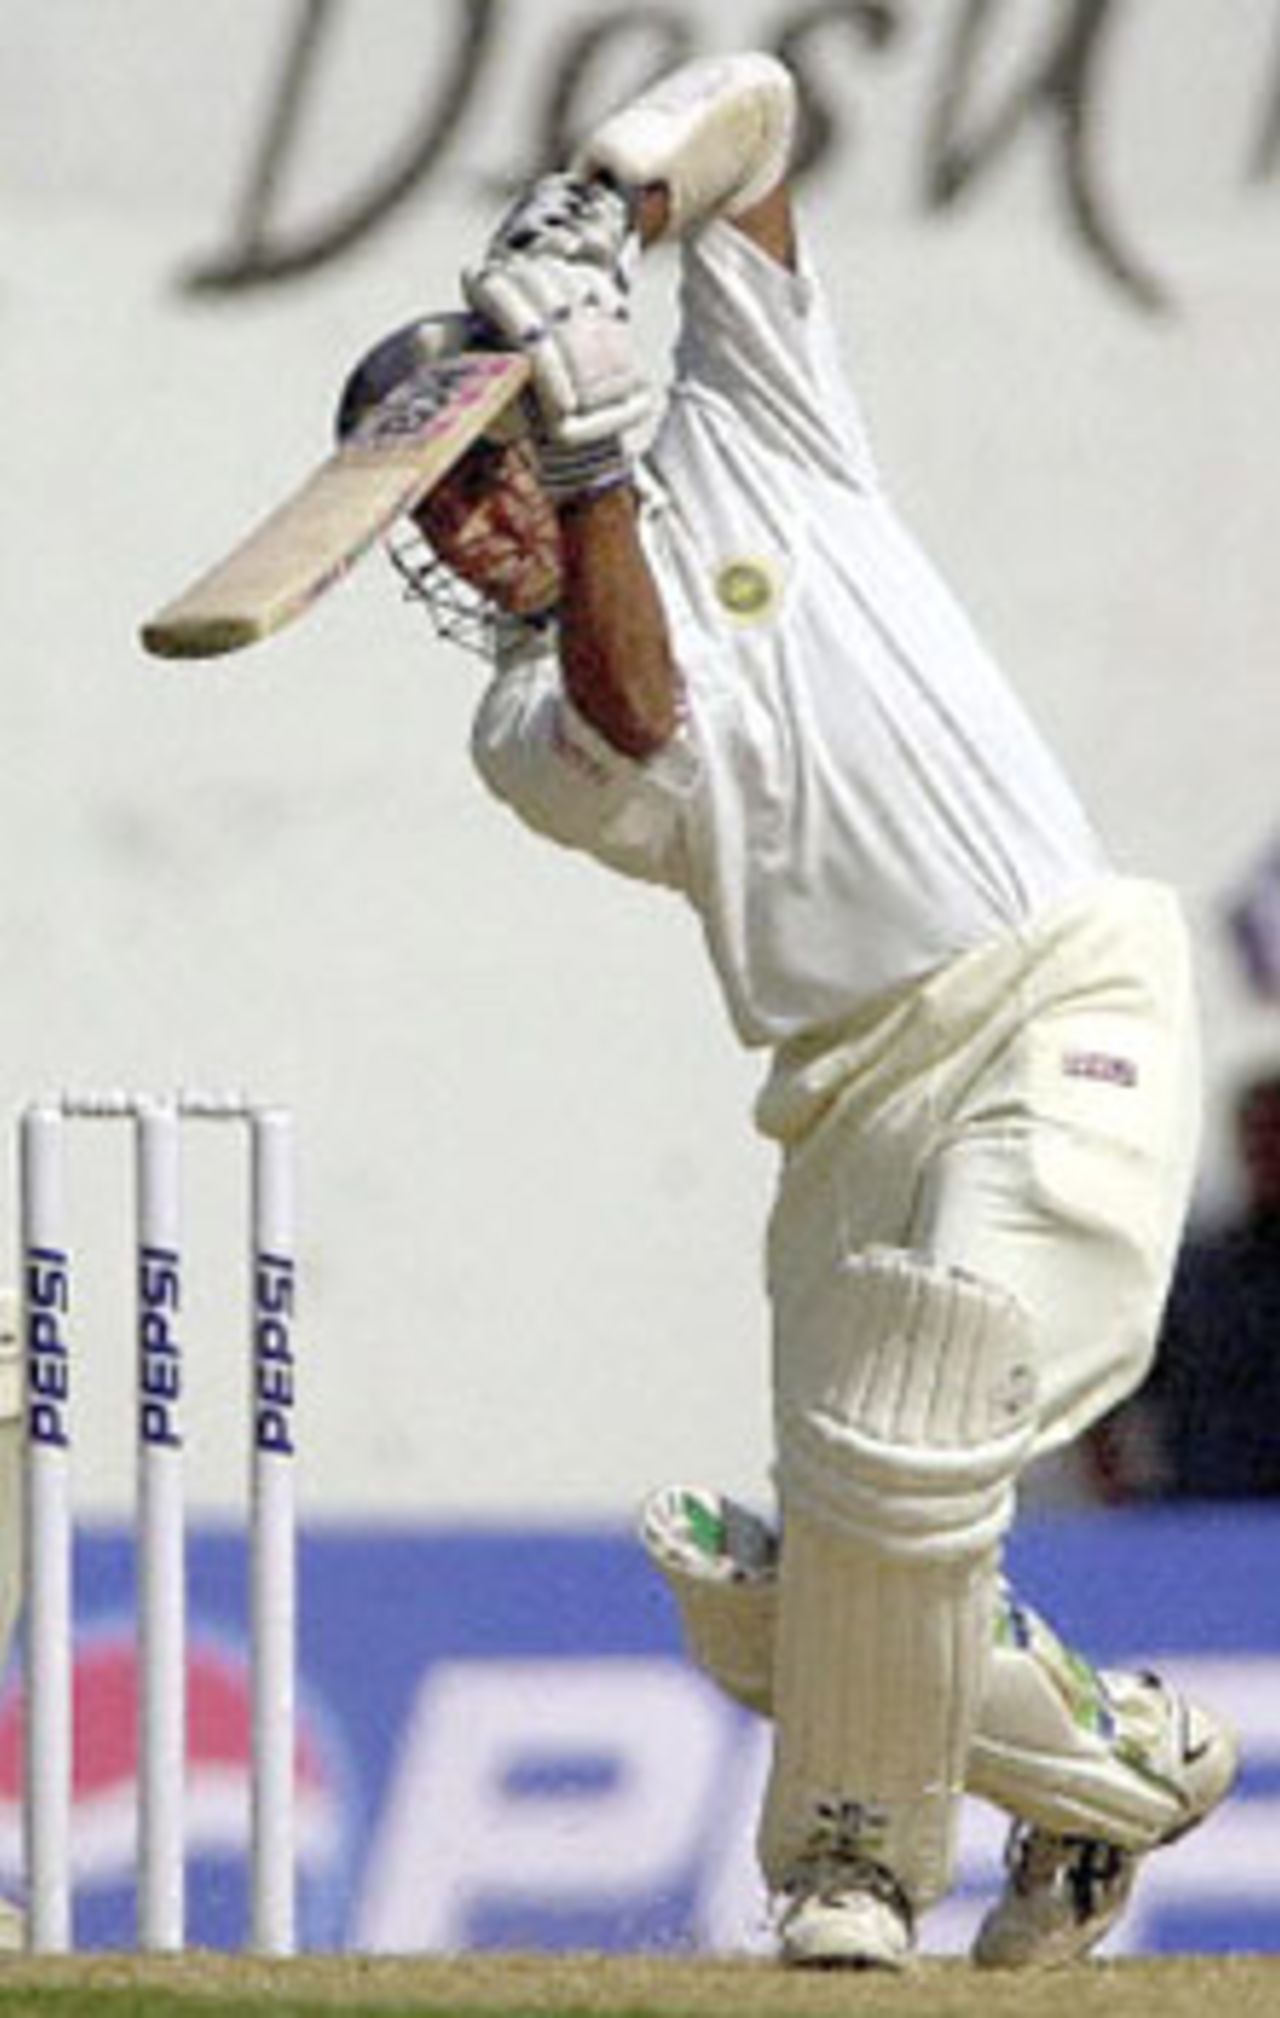 Indian batsman S.S Das drives a delivery from Zimbabwean bowler Henry Olonga on the first day of the second test match between India and Zimbabwe in Nagpur, 25 November 2000. Das was unbeaten on 35 as India made 91 for 1 by lunch. India leads Zimbabwe 1-0 in the two test series.